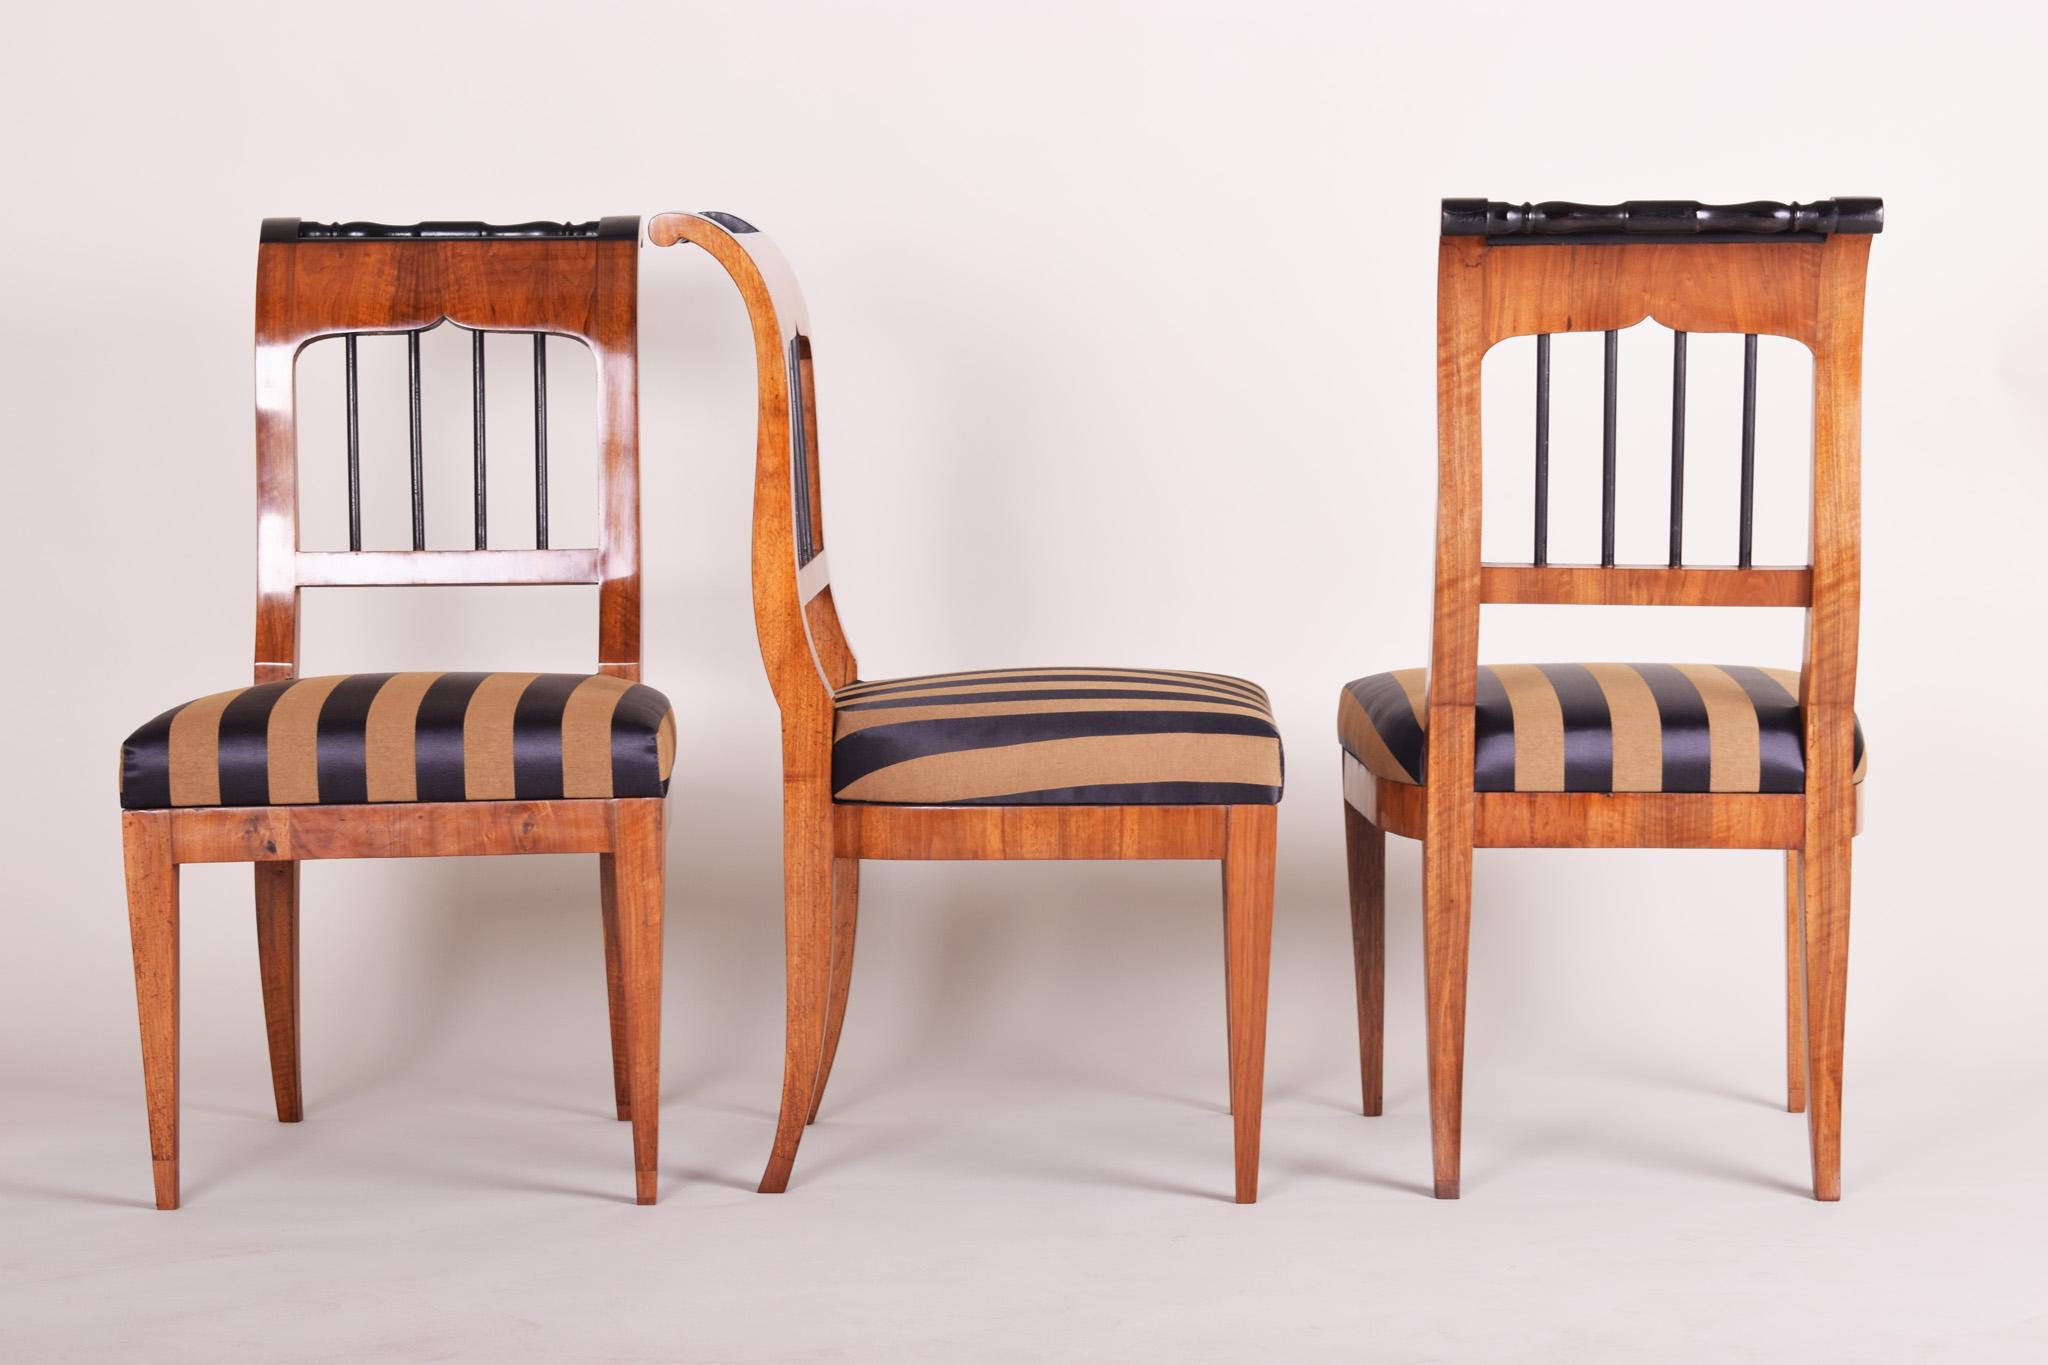 Set of Three Biedermeier Dining Chairs, Made in Austria, 1820s, Walnut In Excellent Condition For Sale In Horomerice, CZ